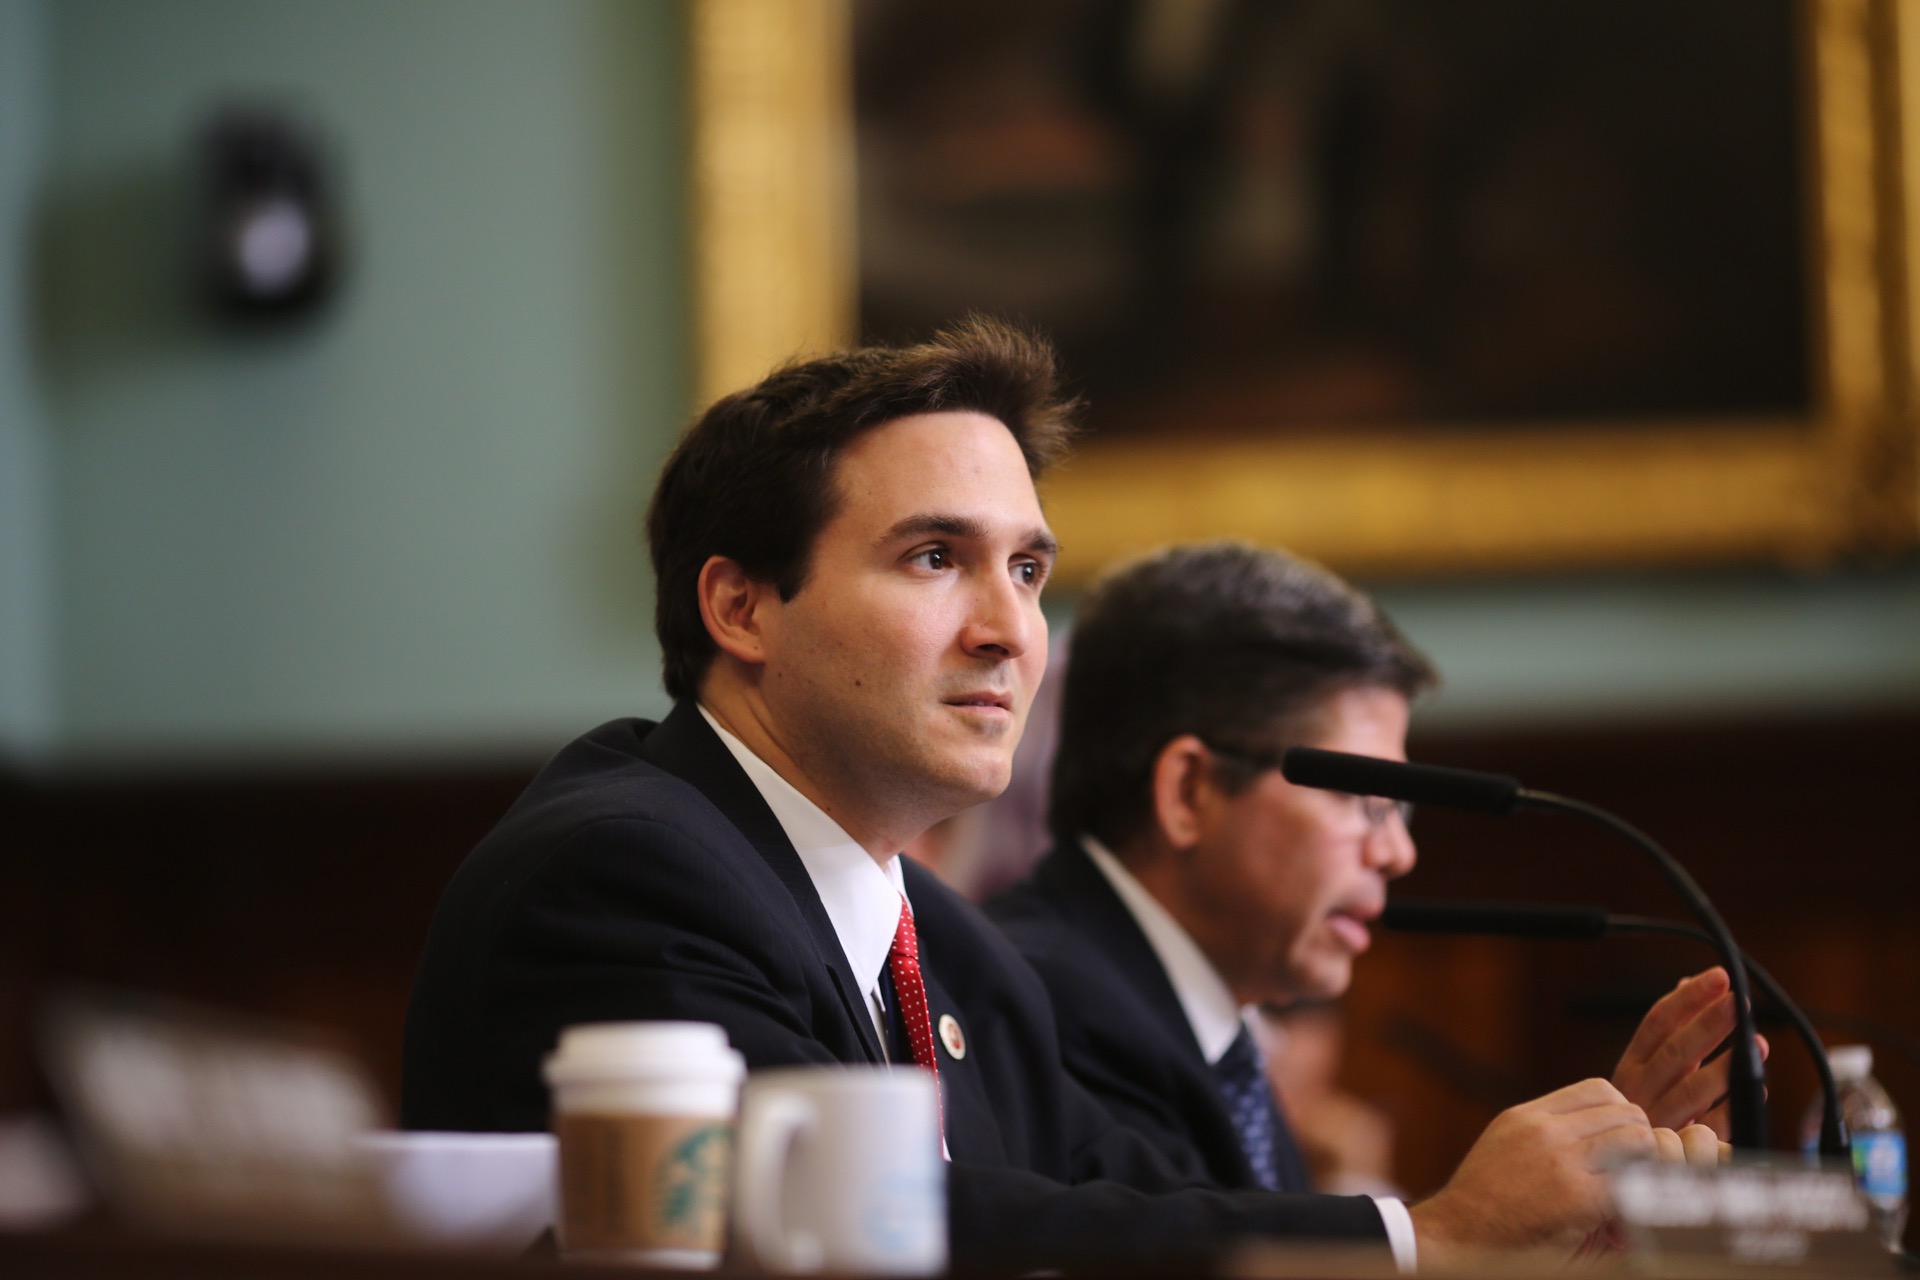 Committee co-chairperson Ben Kallos kept up the line of tough questioning throughout the six-hour hearing. Photo by William Alatriste / NYC Council